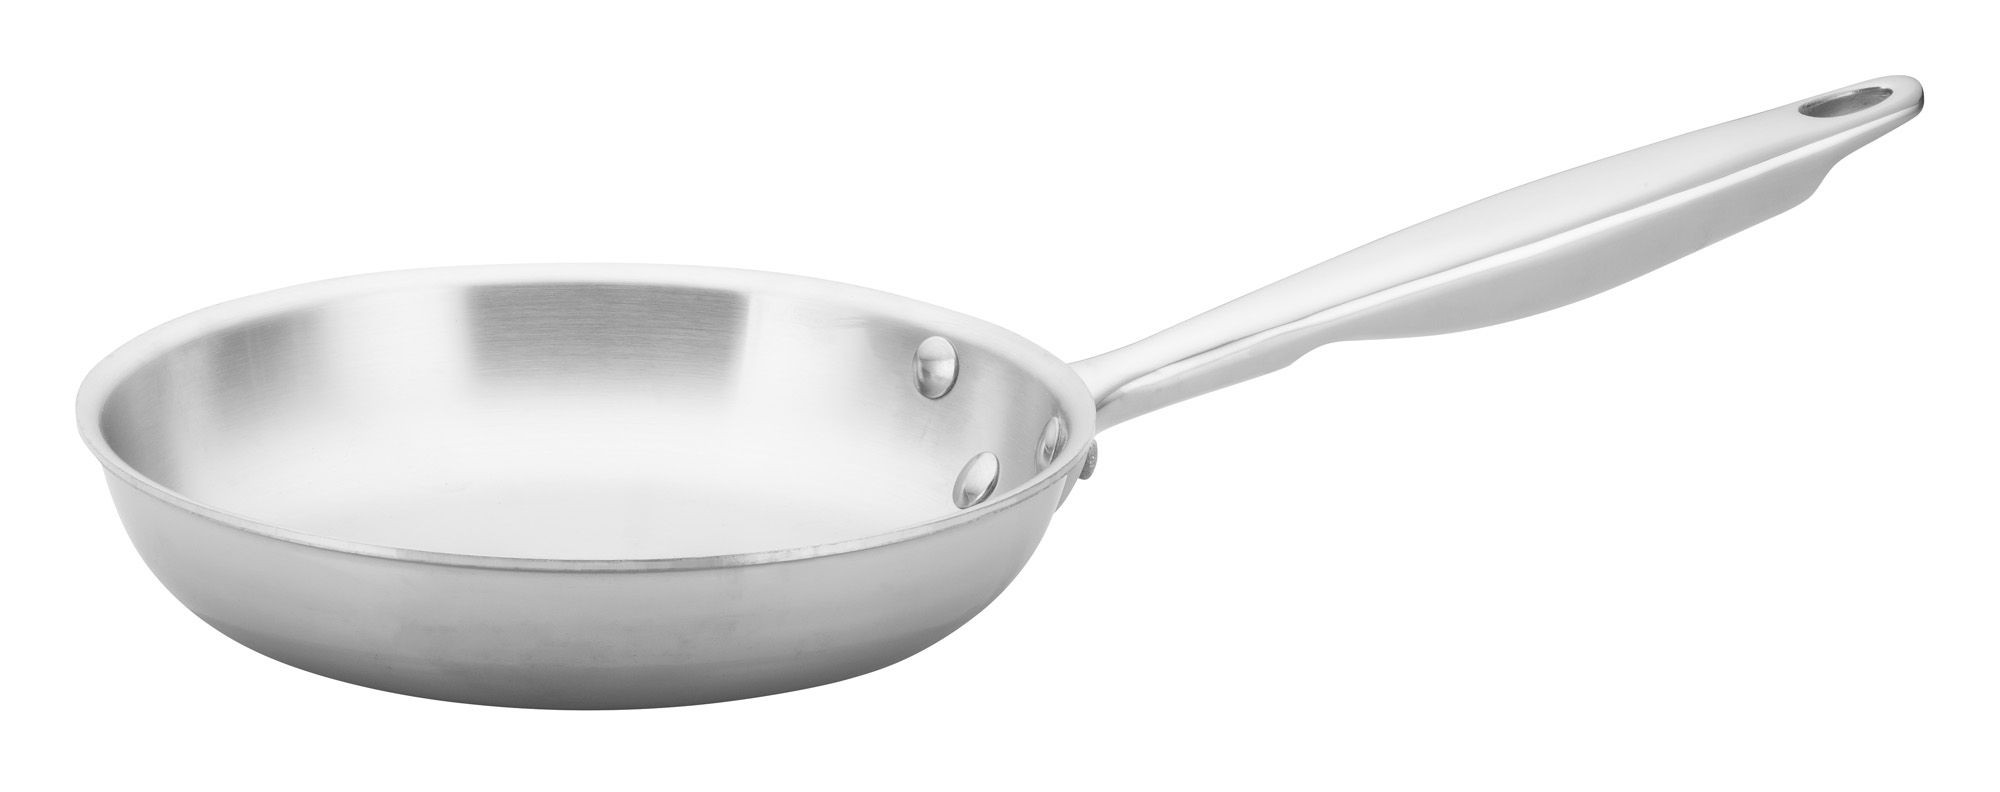 Winco TGFP-7 Tri-Ply Stainless Steel Natural Finish 7" Fry Pan